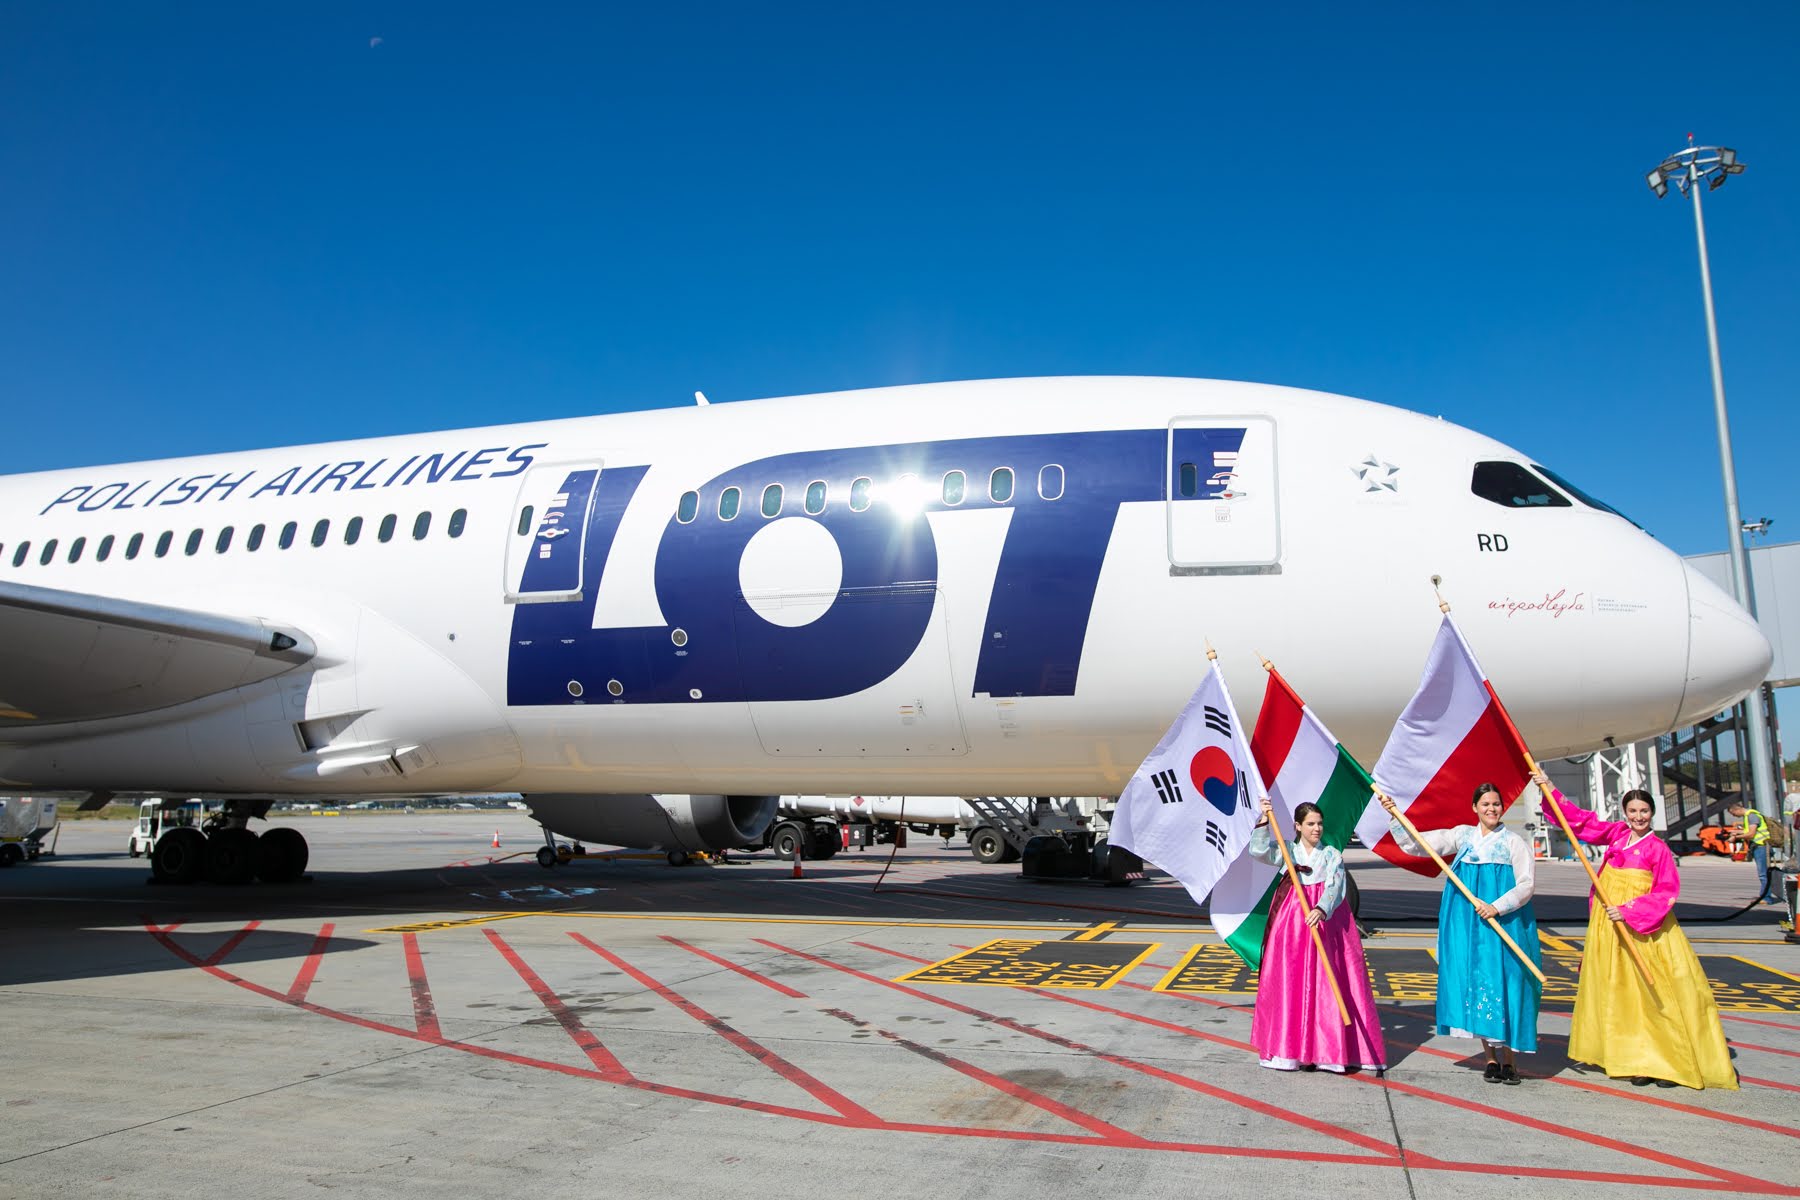 Travel PR News  Budapest Airport welcomed inaugural LOT Polish Airlines  service to Seoul